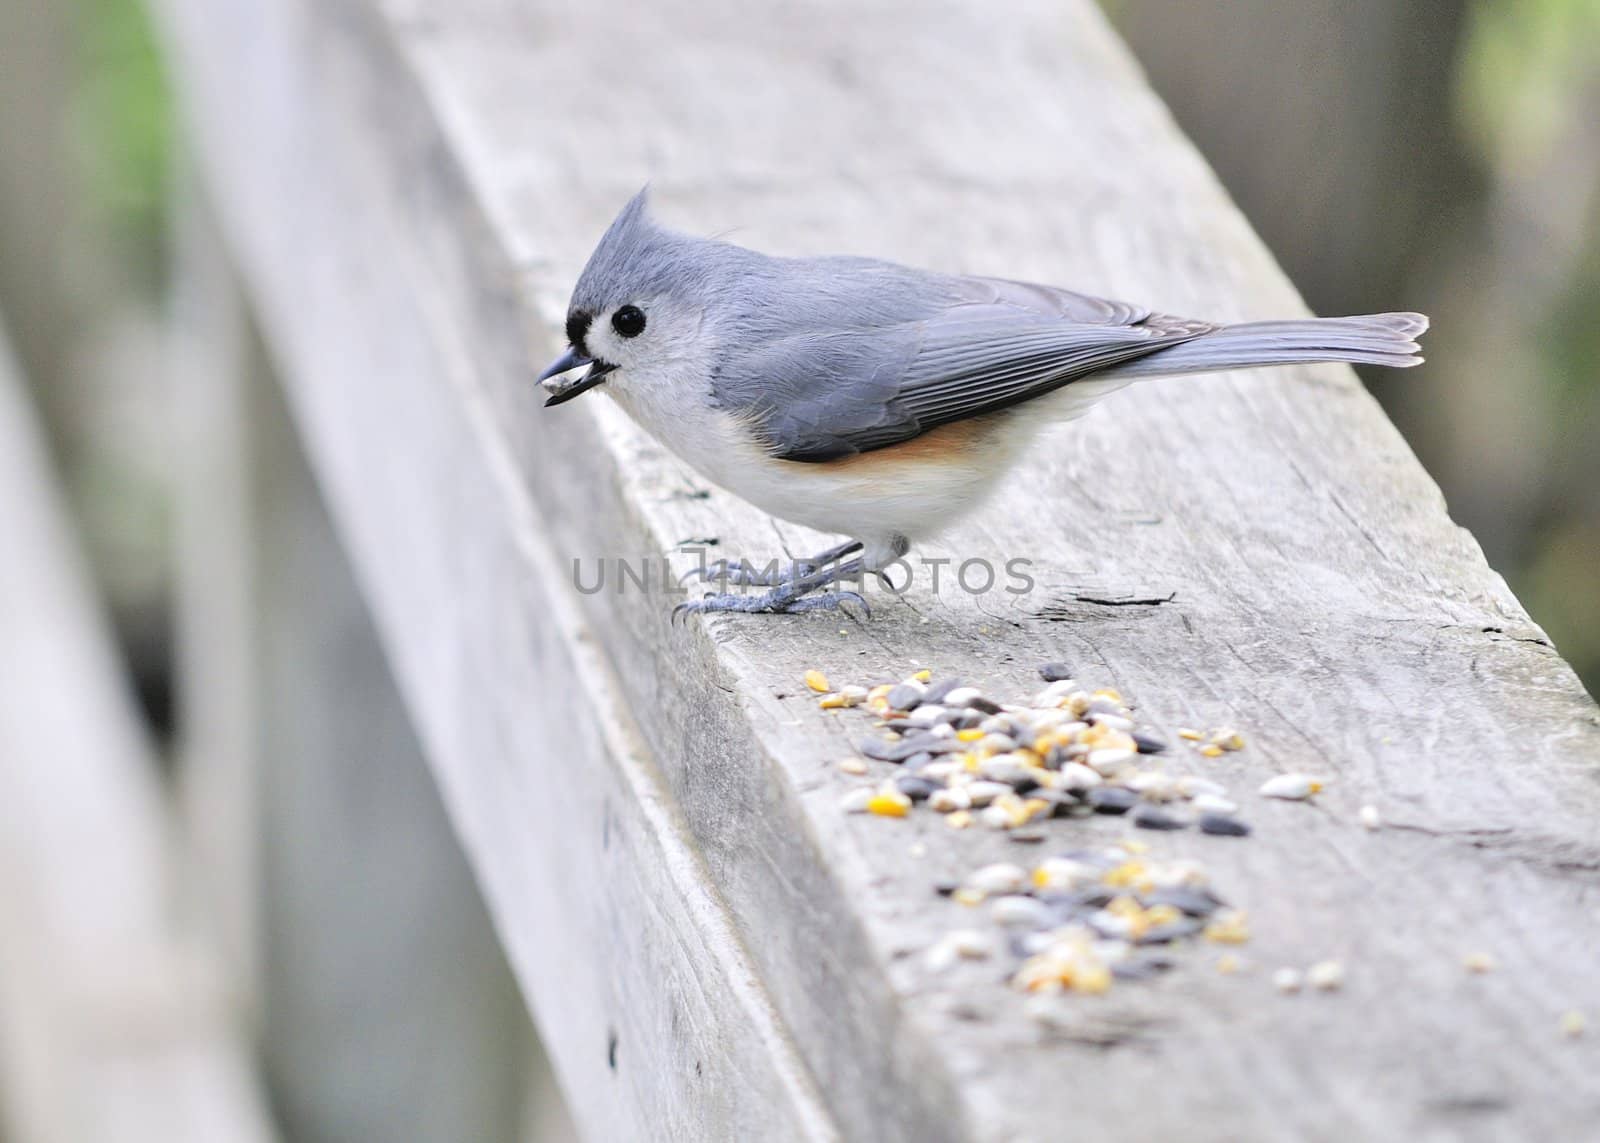 A tufted titmouse perched on a wooden railing with bird seed.